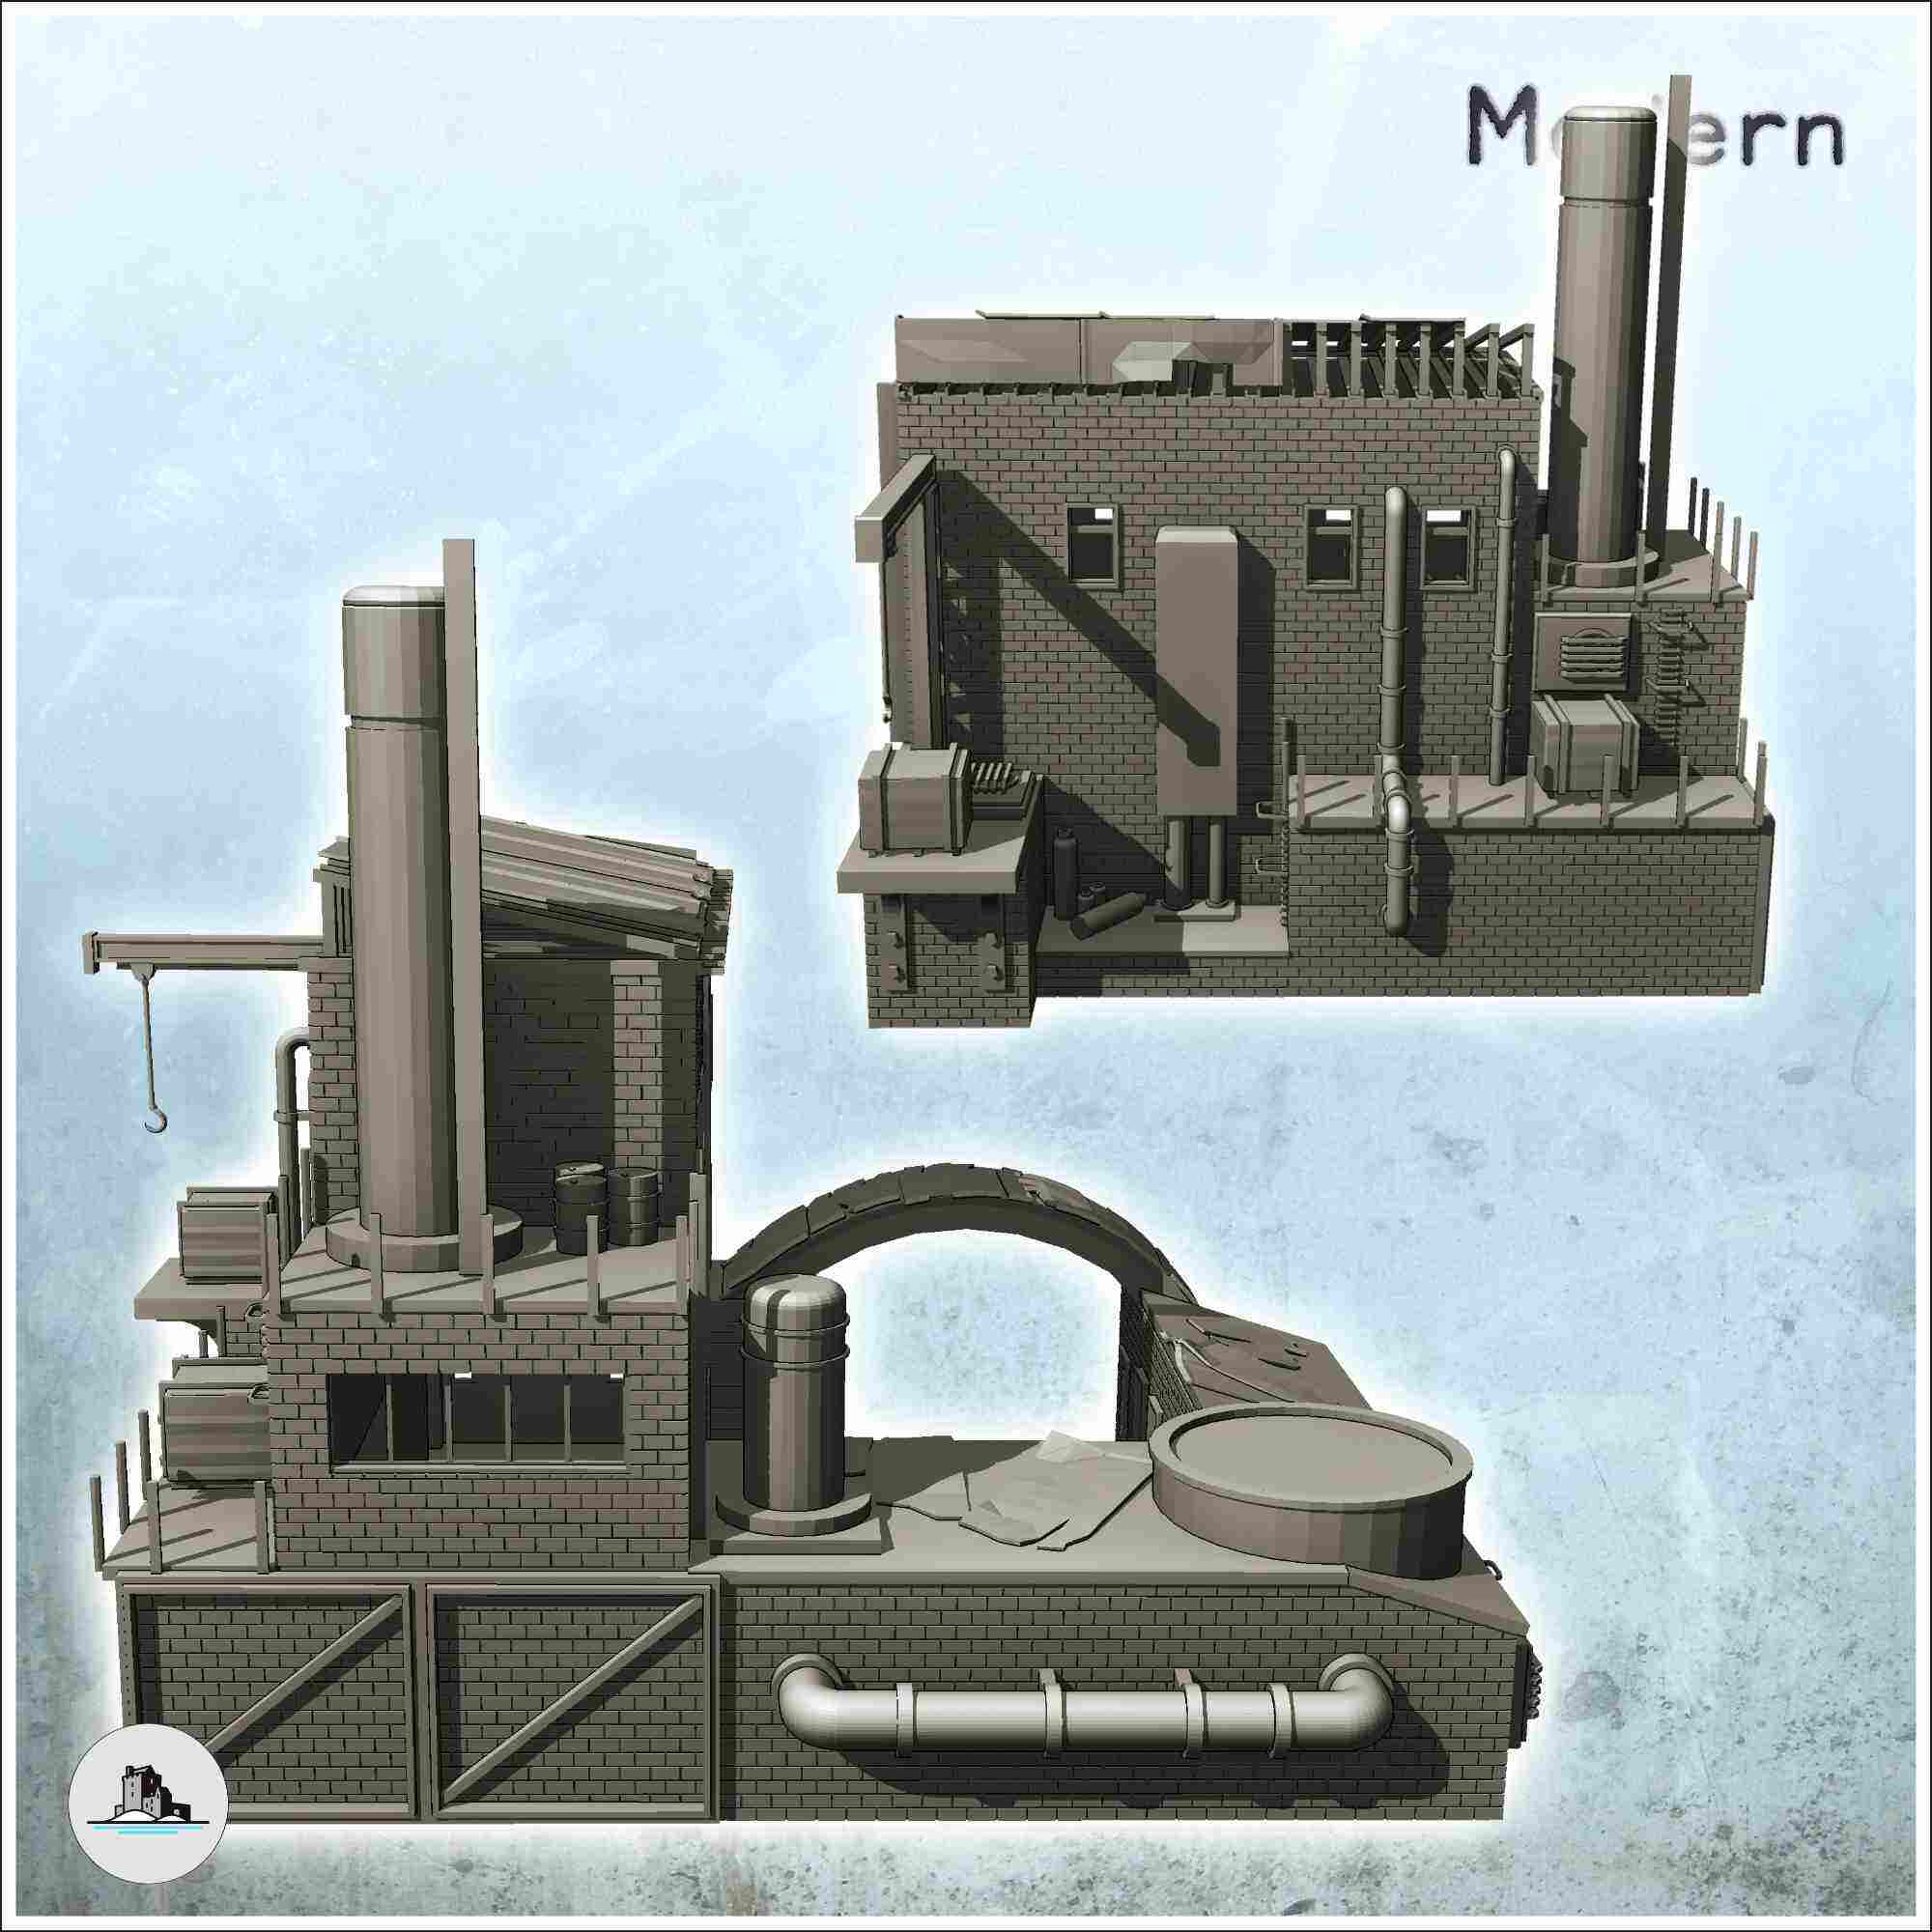 Modern brick factory with large chimney and access arch (int